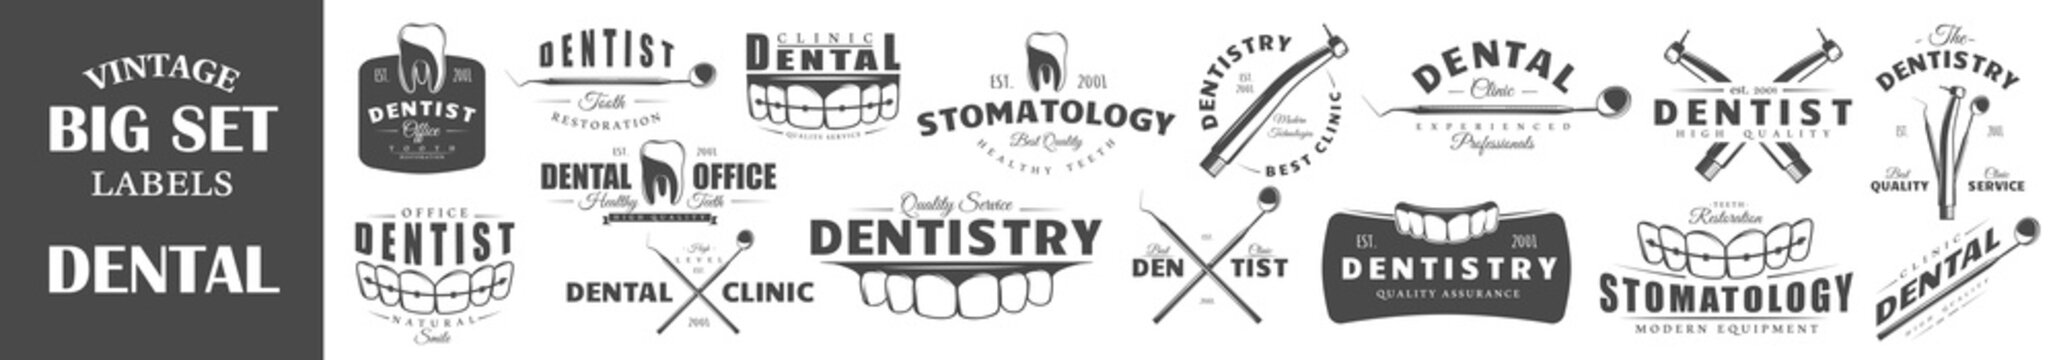 Set of dentist labels. Elements for design on the dentist theme. Collection of dentist symbols: tooth, jaw, dental tools. Modern labels of dentist. Emblems and logos of dentist. Vector illustration